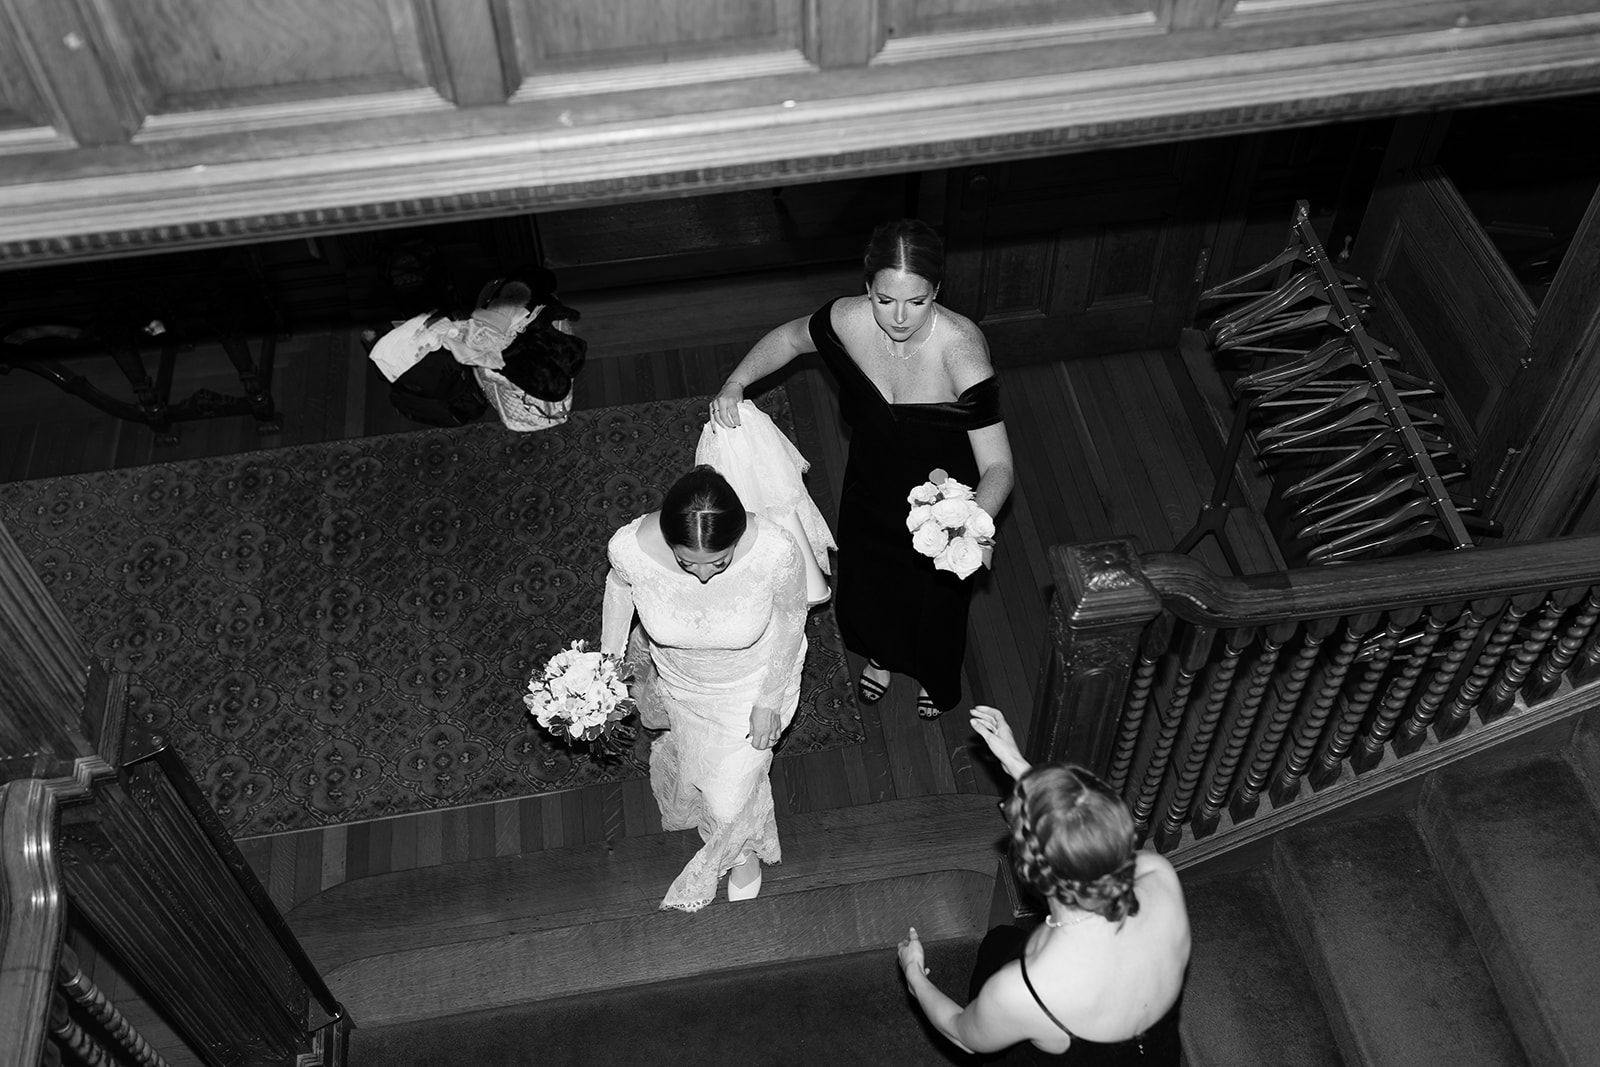 Stunning bride and and bridesmaids come up the stairs towards the elegant wedding ceremony